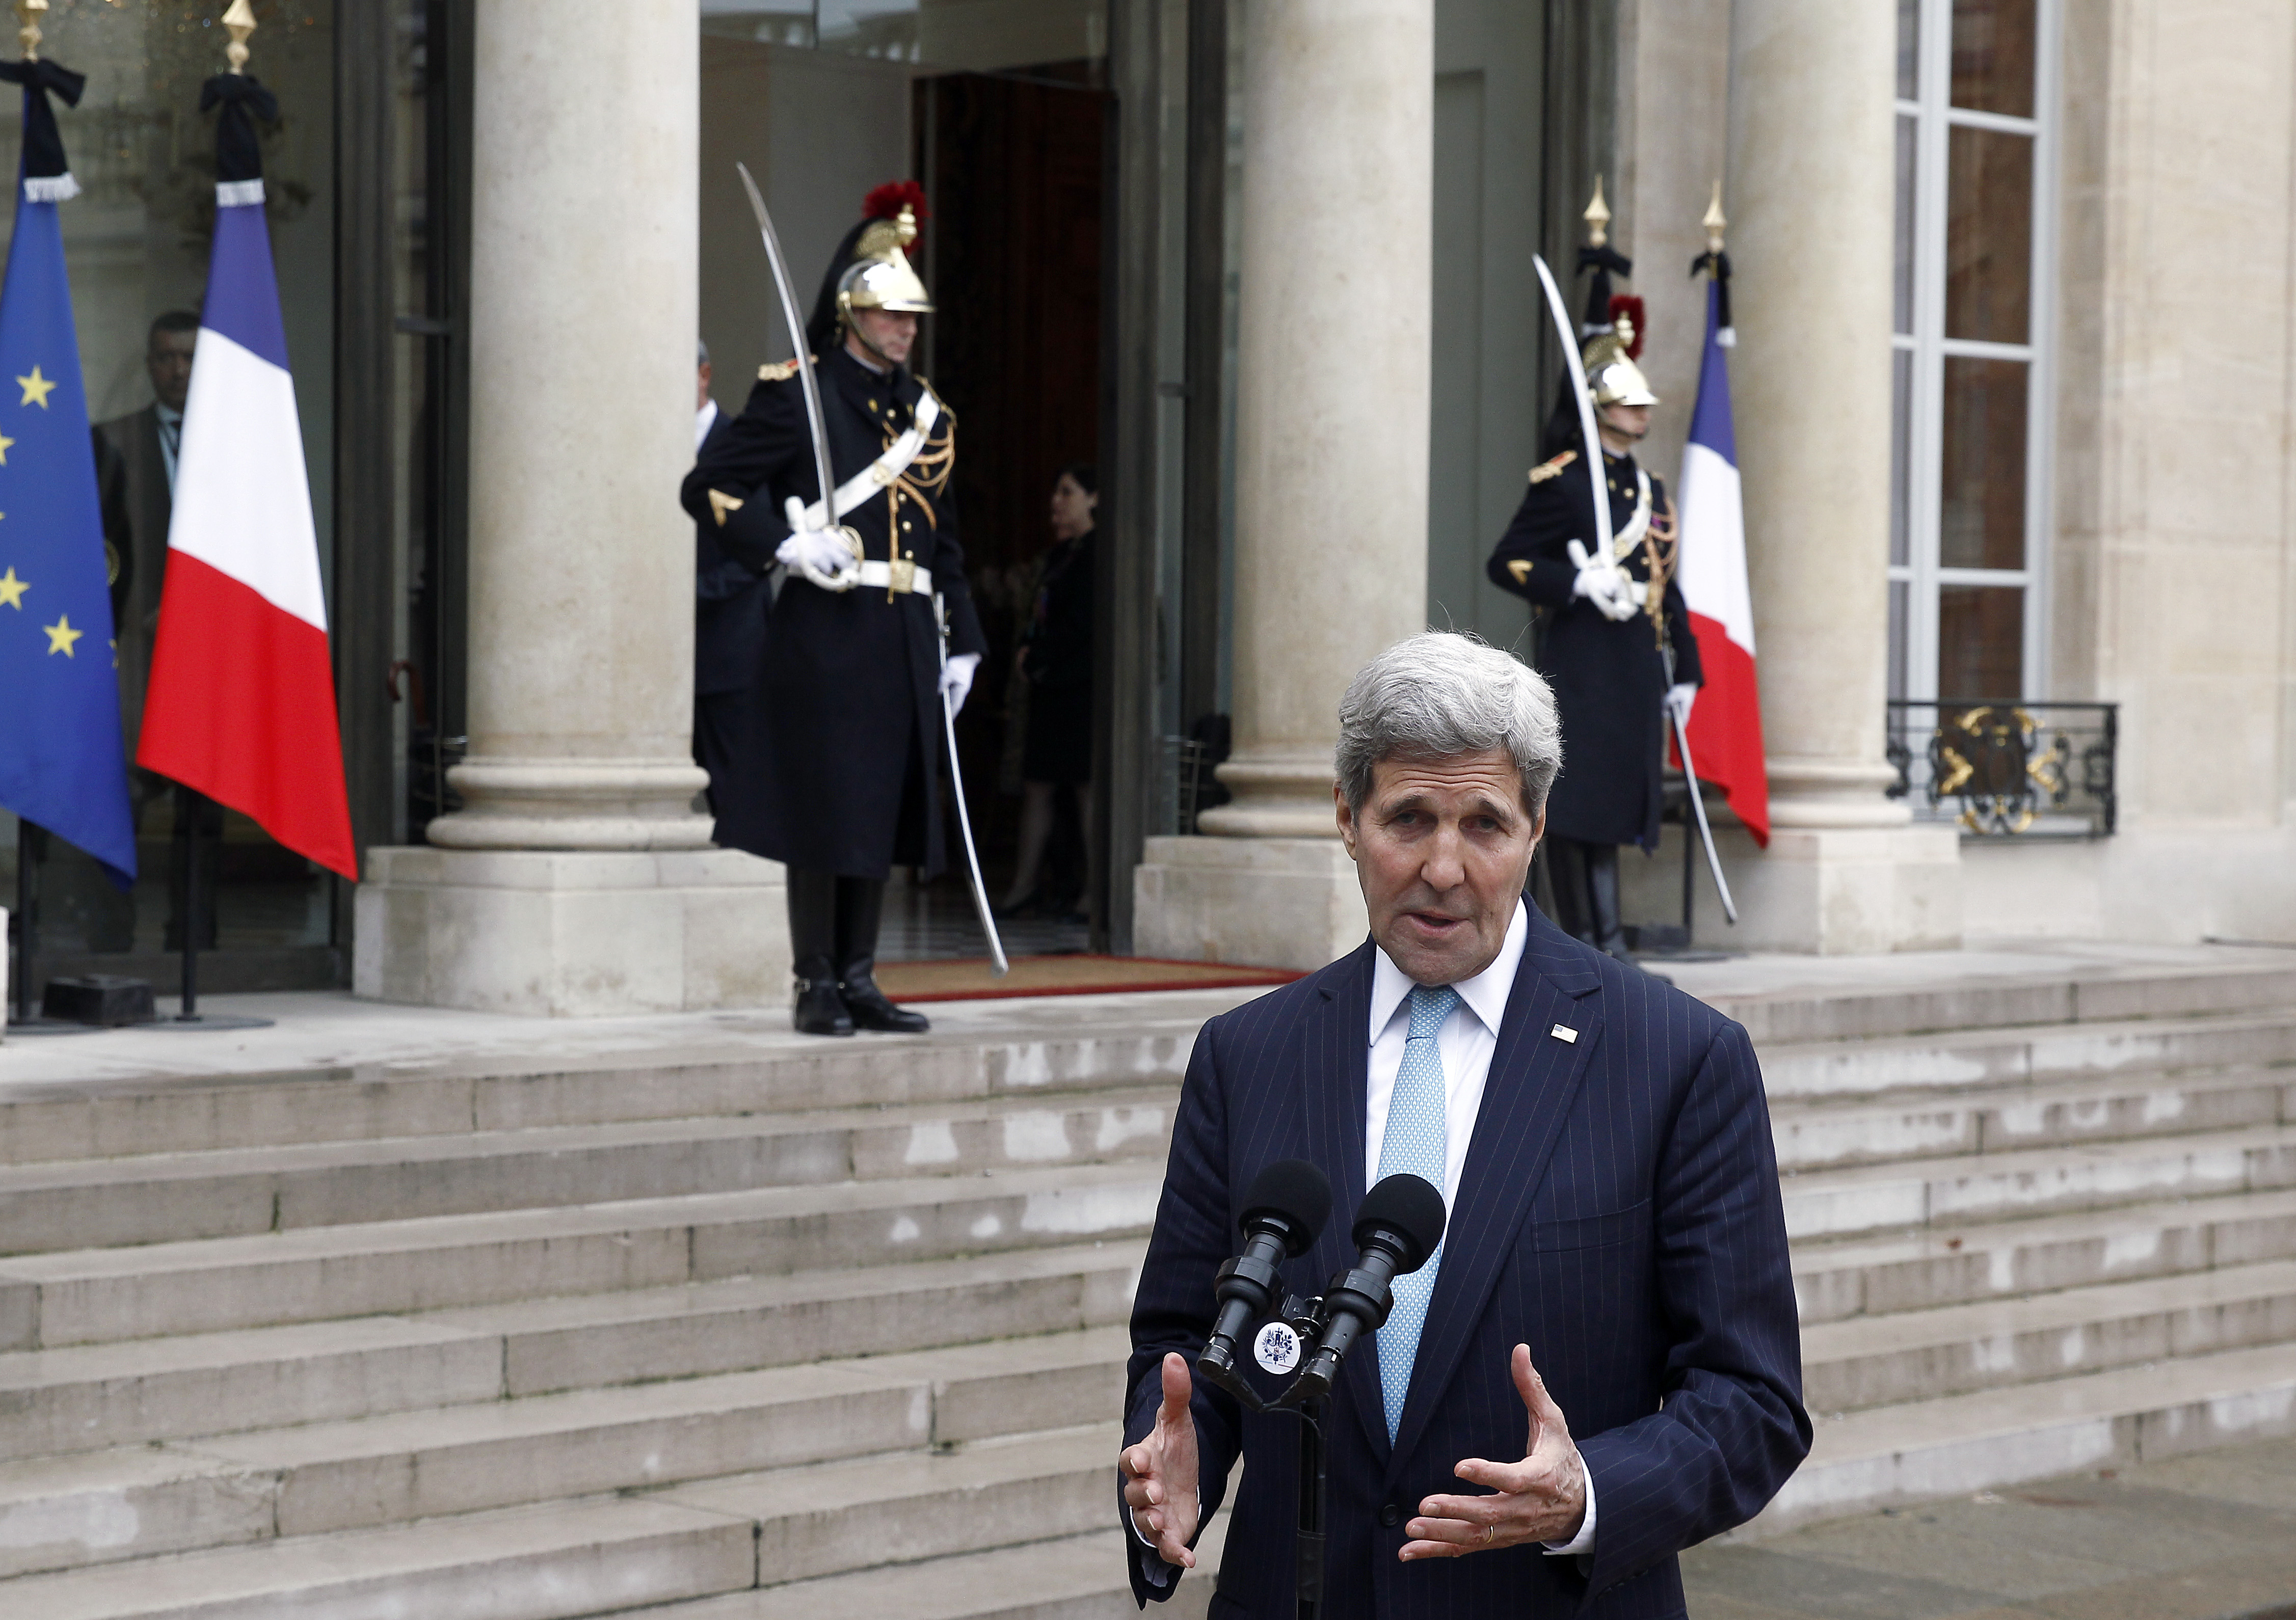 US Secretary of State John Kerry talks to the media after a meeting with French President Francois Hollande at the Elysee Presidential Palace on November 17, 2015 in Paris, France. John Kerry arrives in Paris to pay tribute to victims of last week's terrorist attacks. (Thierry Chesnot—Getty Images)